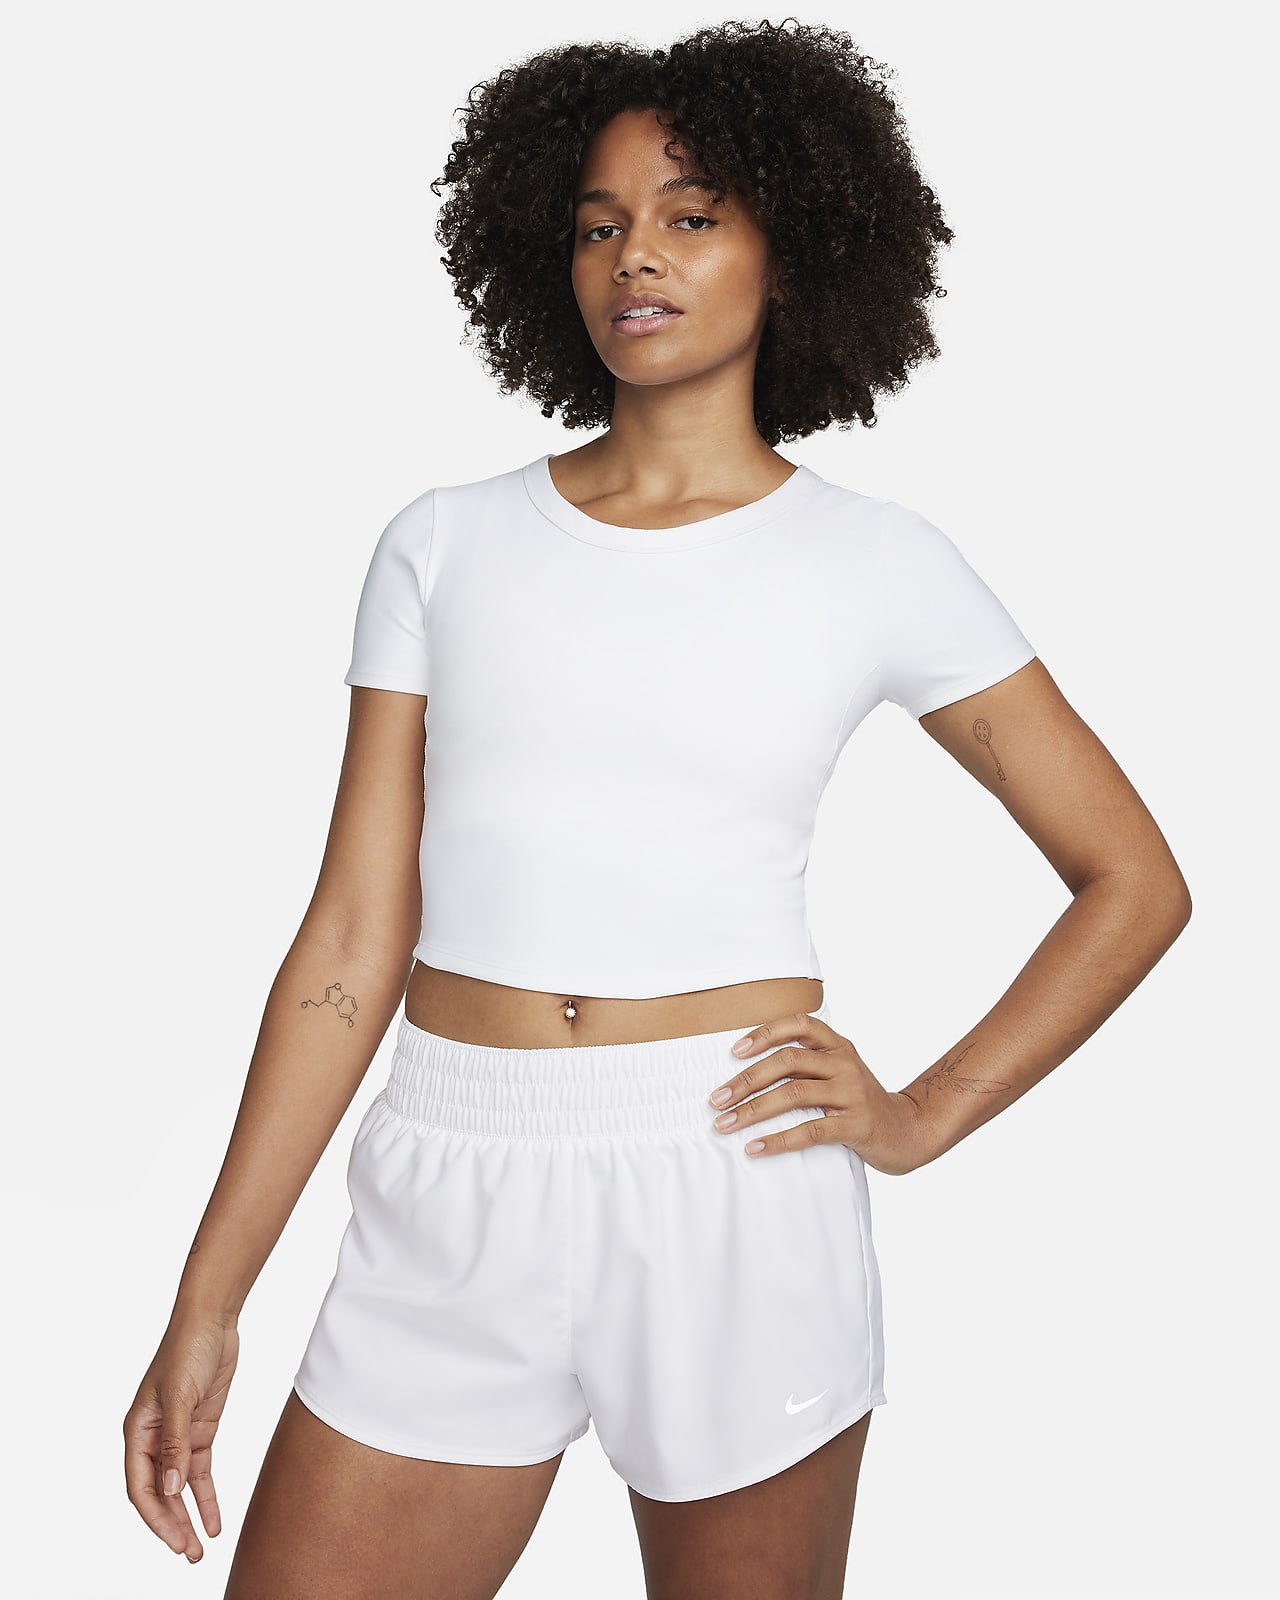 Nike One Fitted Women's Dri-FIT Short-Sleeve Cropped Top. Nike CA